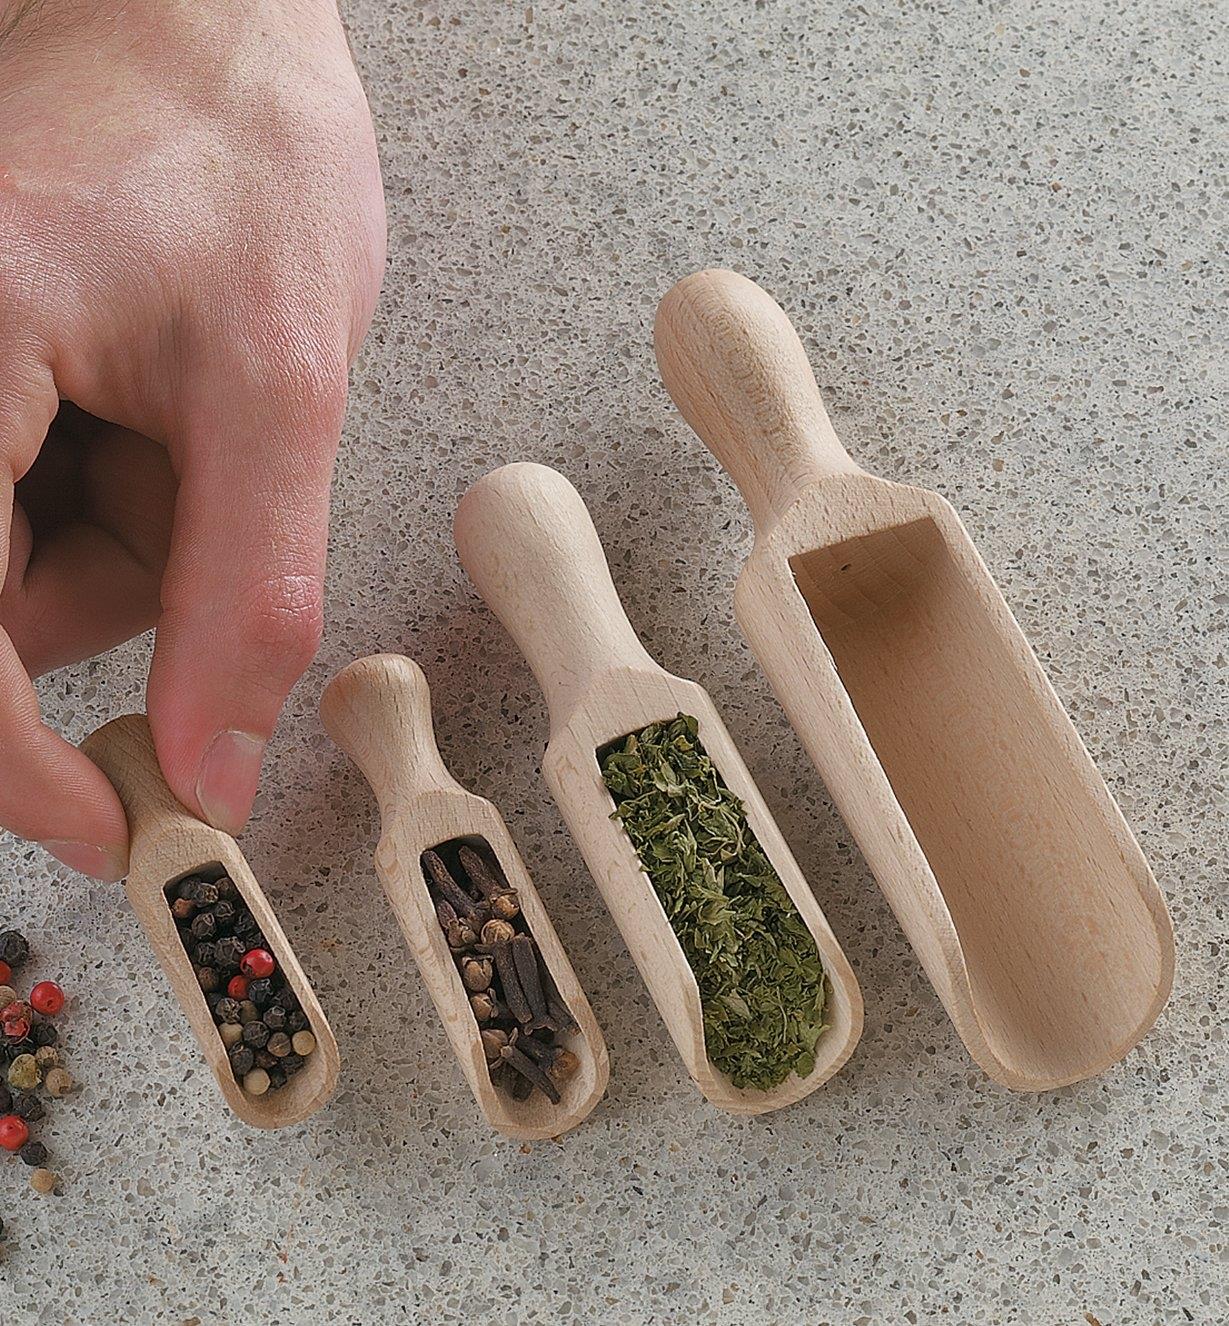 Beechwood scoops filled with various spices